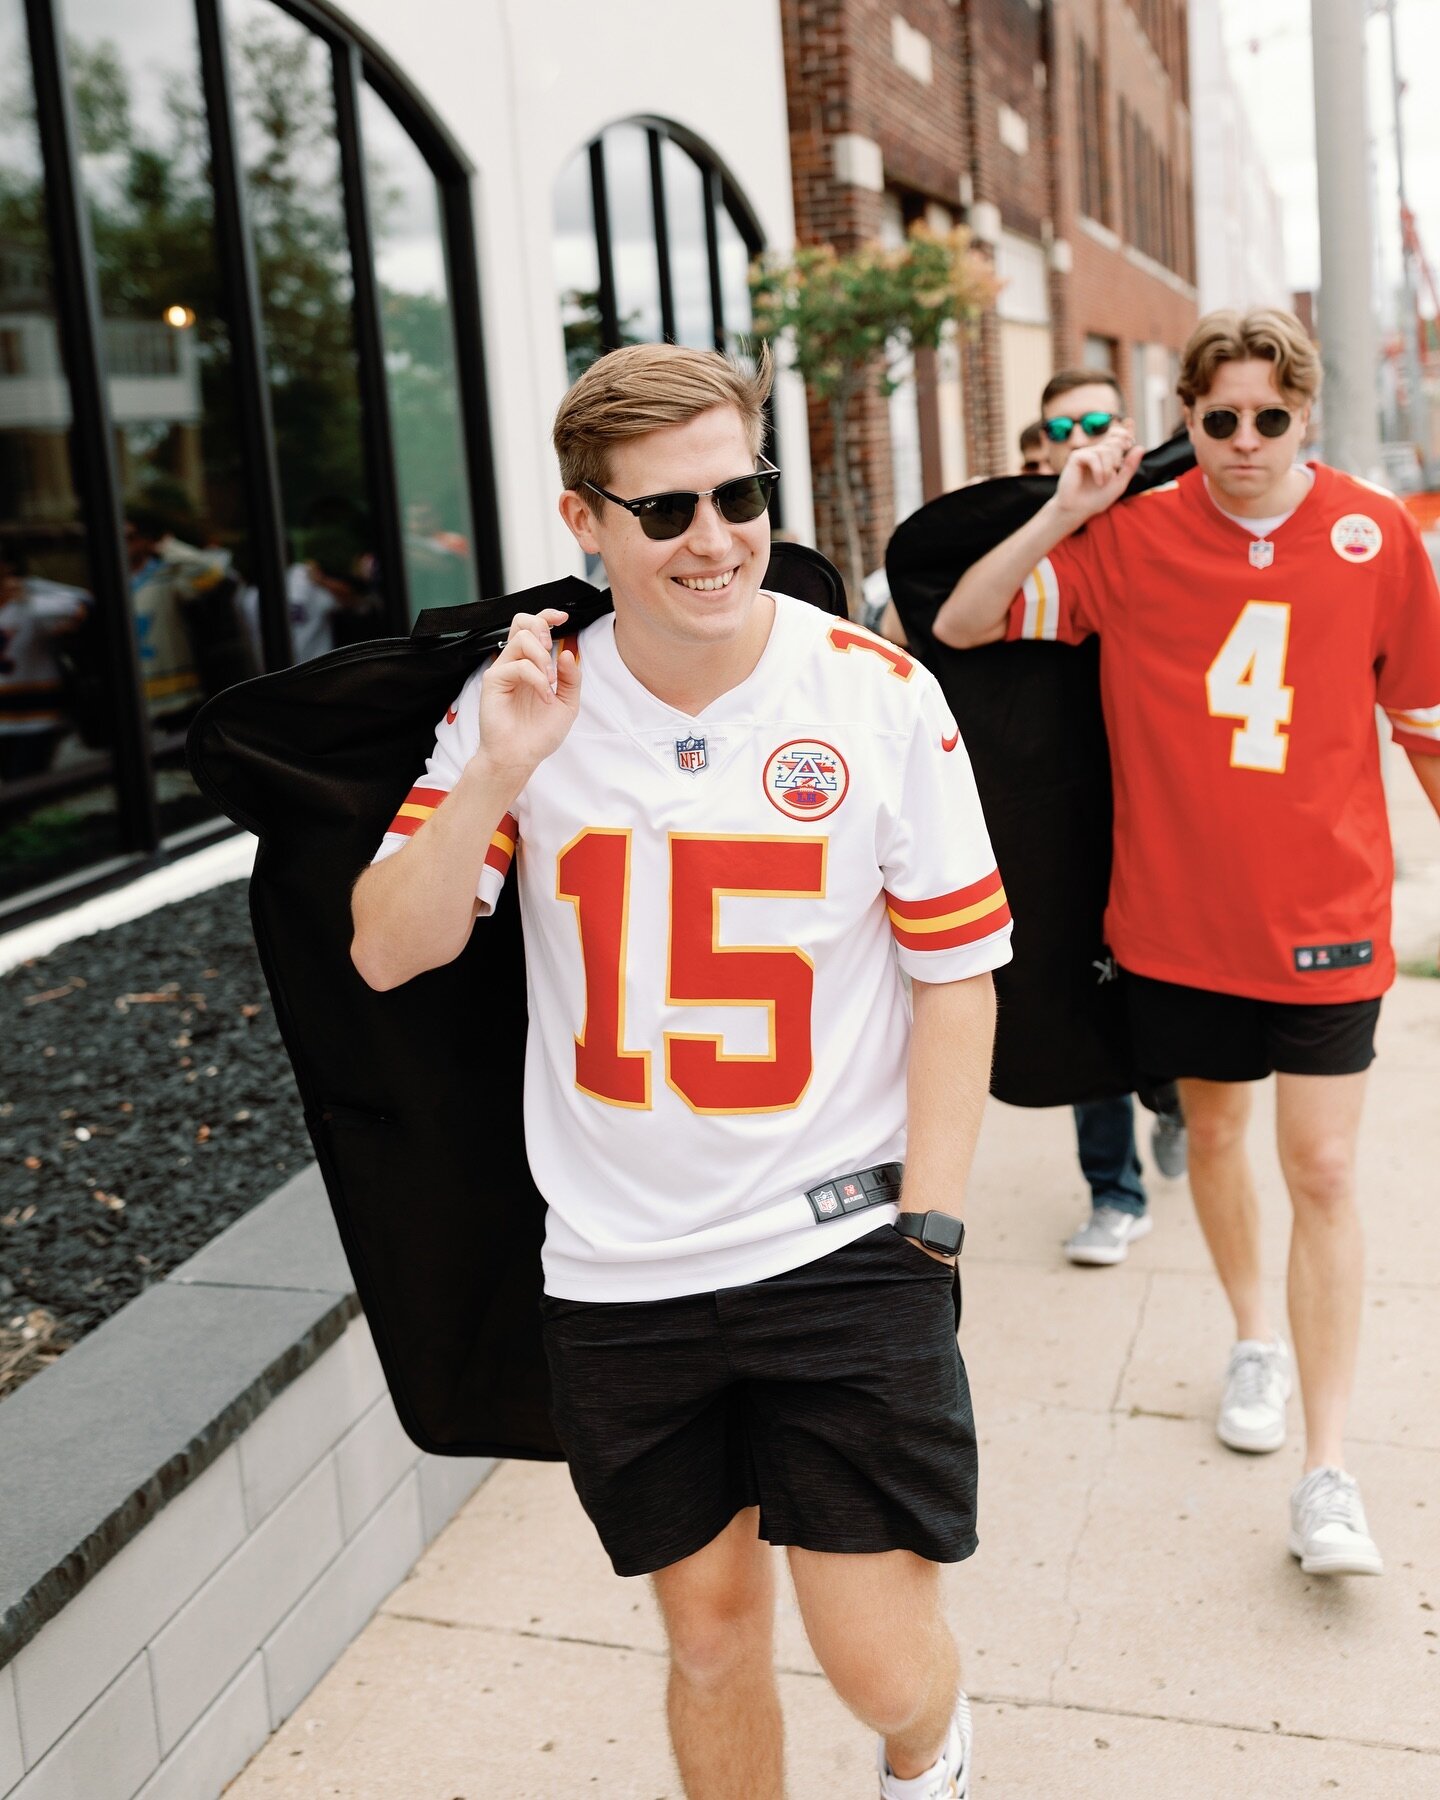 BIG DAY. Throwing it back to Jake &amp; his boys rolling in for his big day in October.

Let&rsquo;s go Chiefs!!